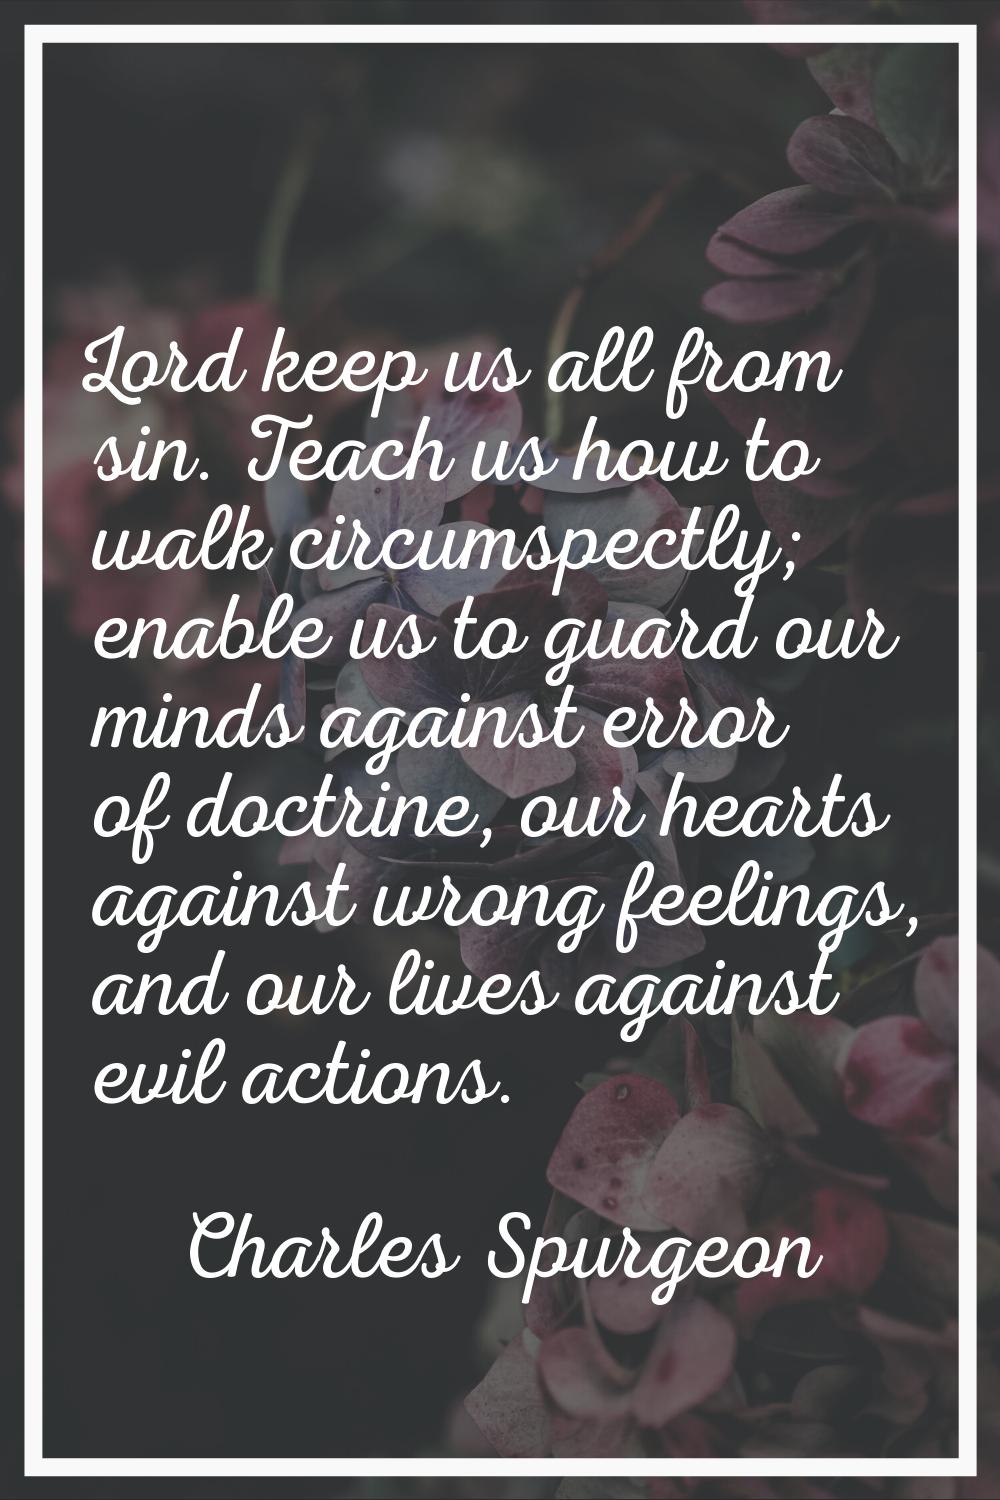 Lord keep us all from sin. Teach us how to walk circumspectly; enable us to guard our minds against